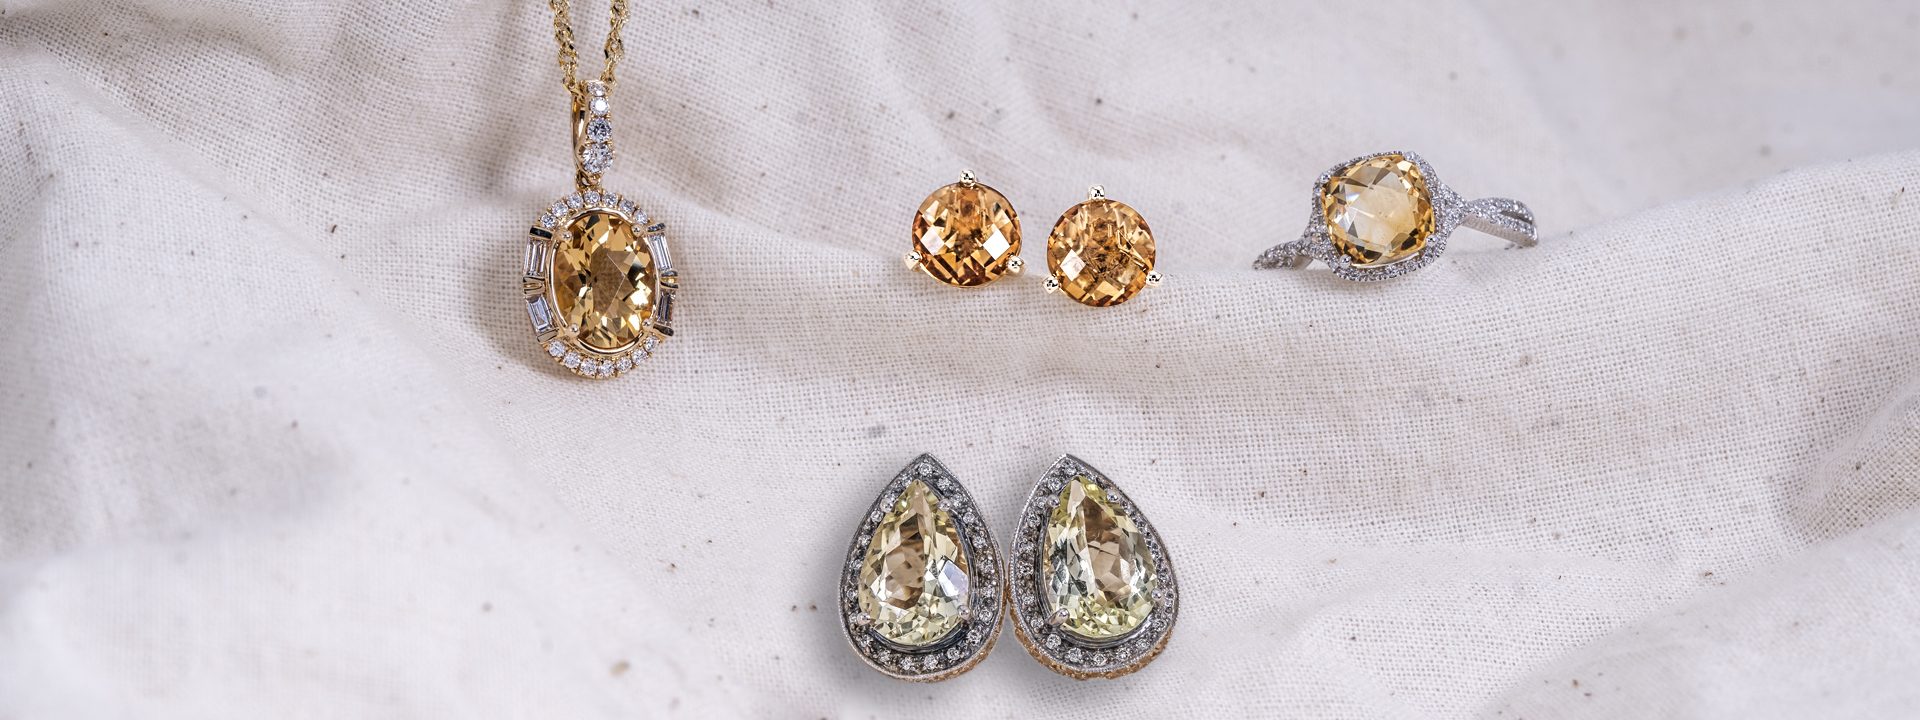 Two pairs of citrine stud earrings, one citrine ring, and one citrine pendant necklace on a white cloth background.